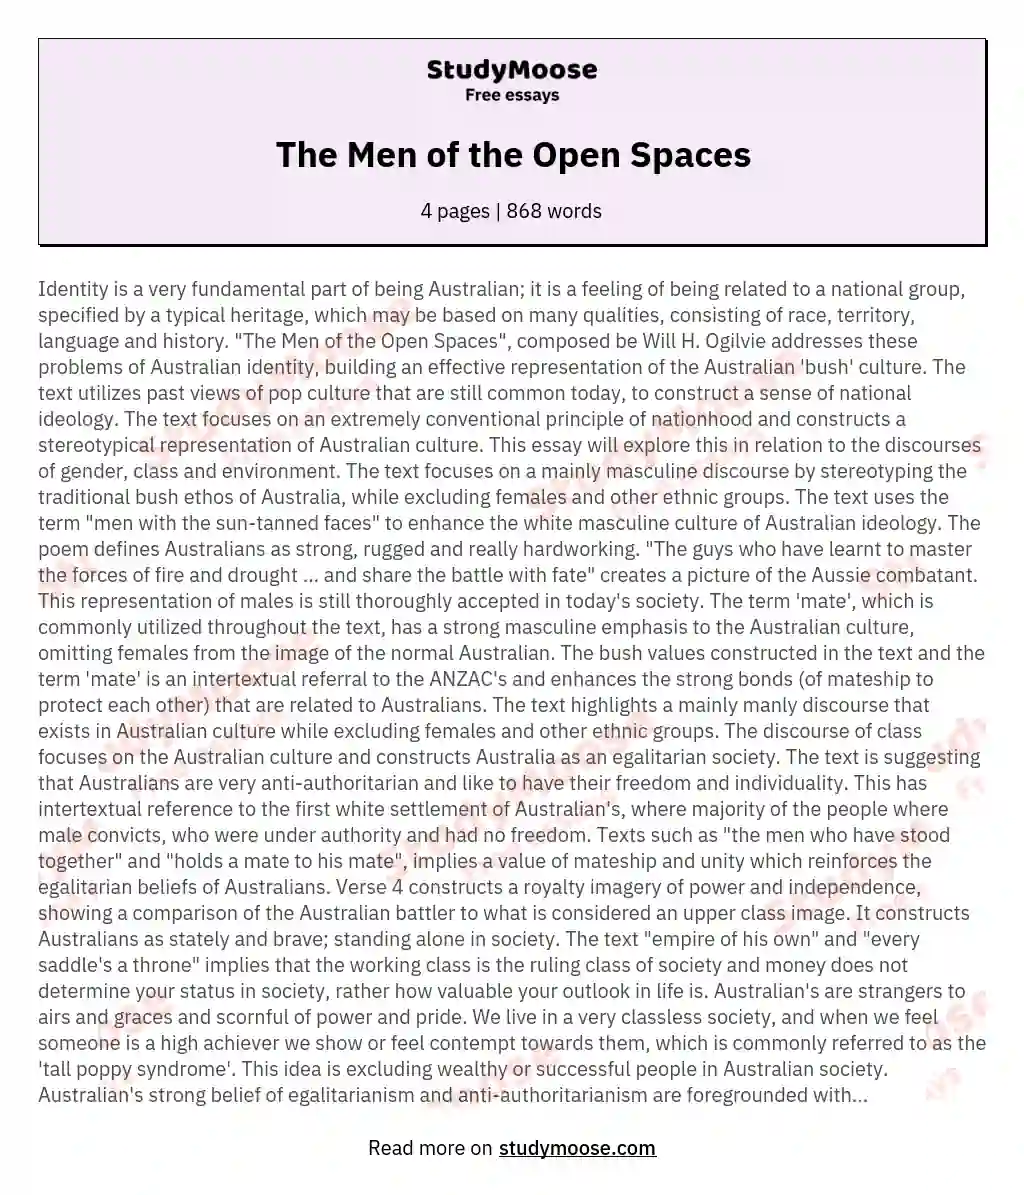 The Men of the Open Spaces